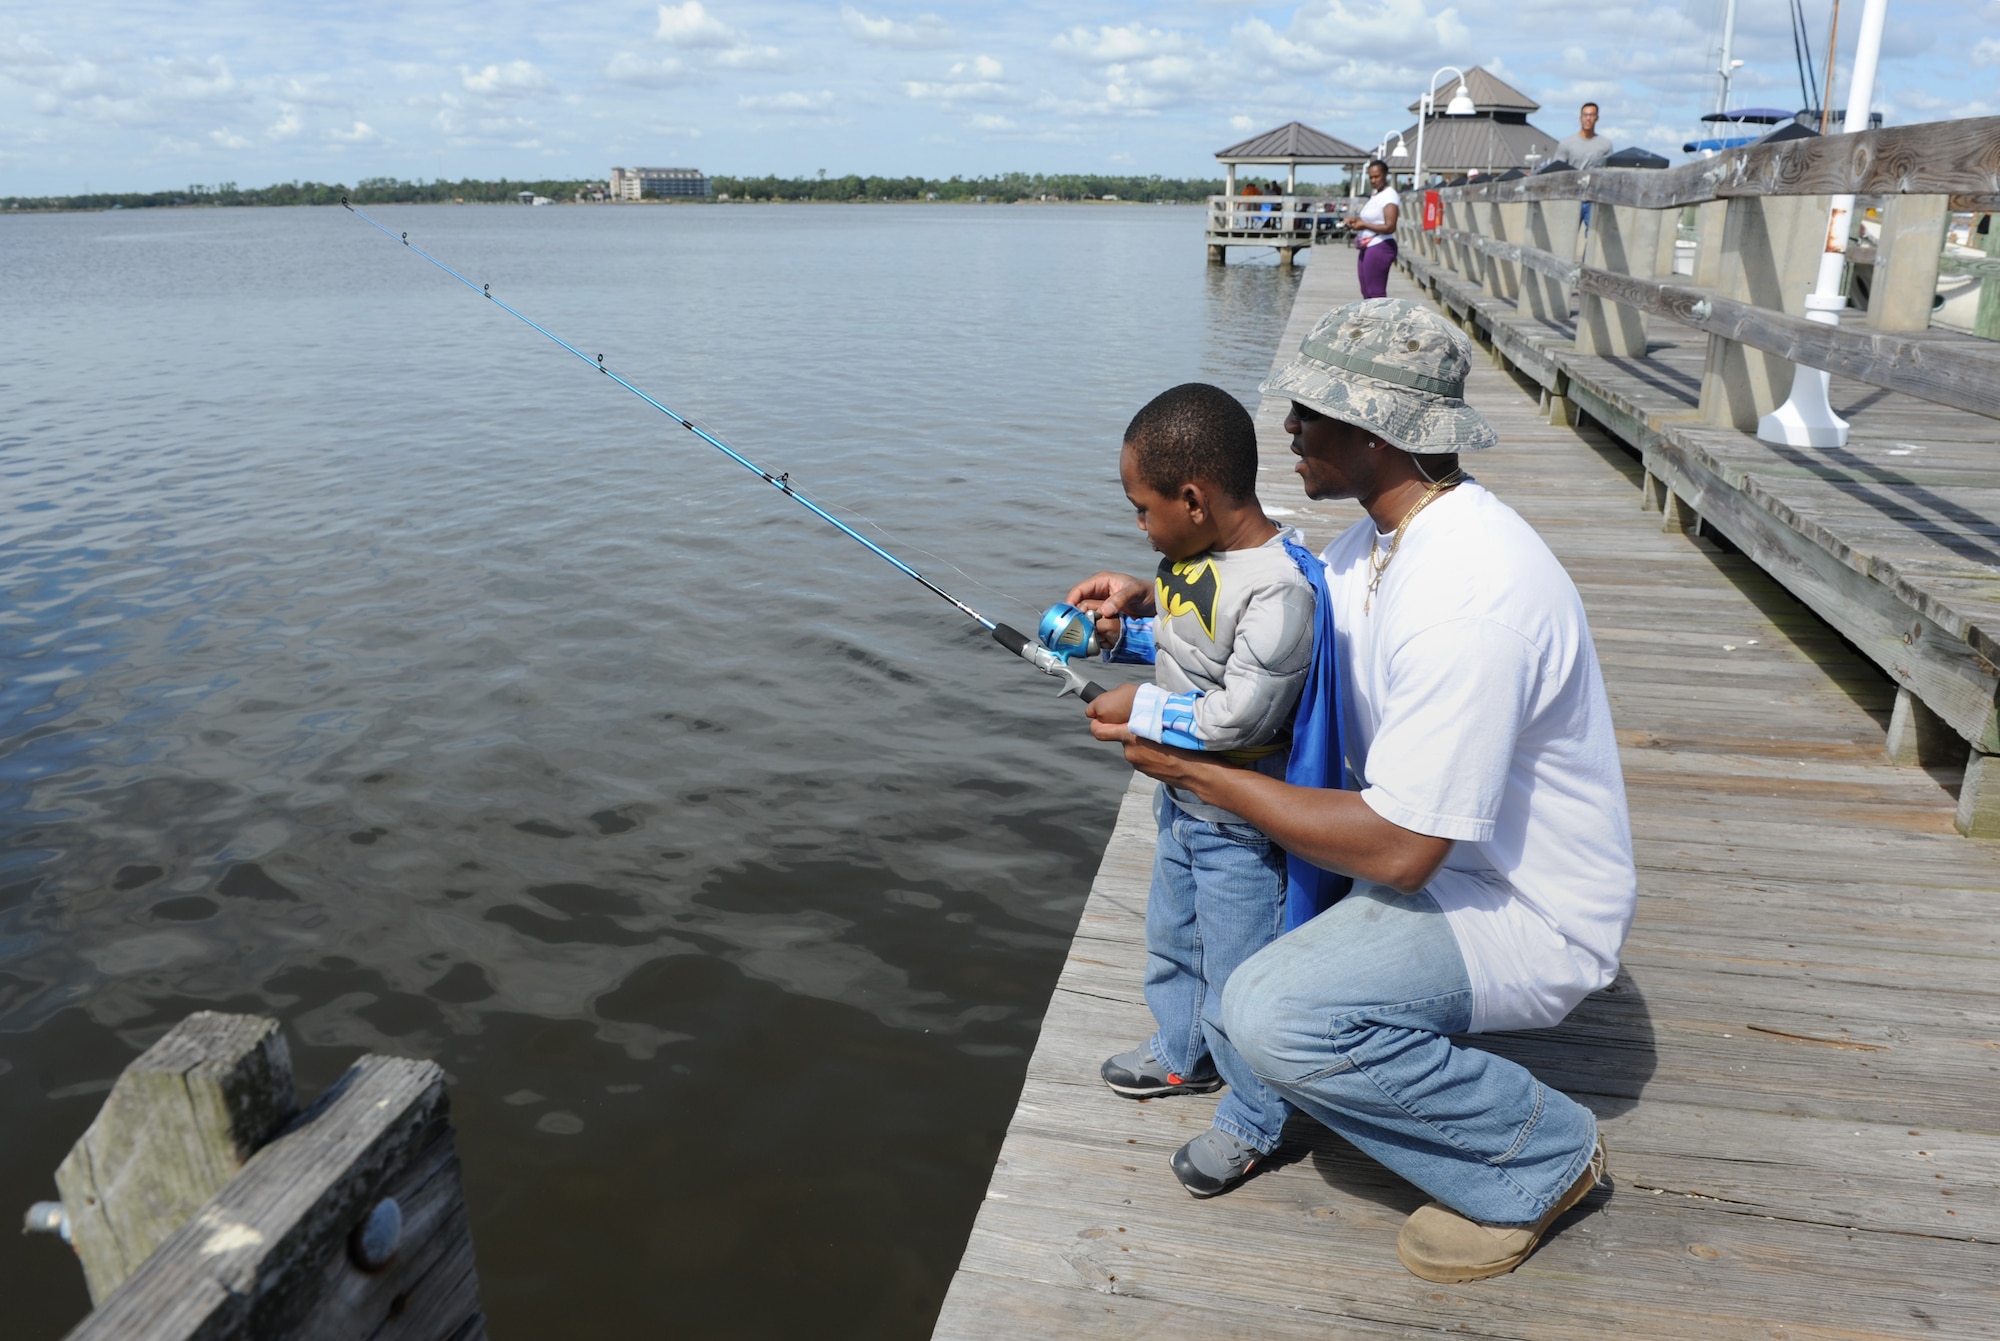 Staff Sgt. Edward Burden, 366th Training Squadron, Detachment 6, structural instructor, Naval Construction Battalion Center, Gulfport, Miss., and his son, Kaden, cast their bait out into the Biloxi Back Bay during the Kids’ Fishing Rodeo at the marina Oct. 15, 2016, on Keesler Air Force Base, Miss. Over 90 participants attended the event where prizes were awarded for different categories and free food was available. (U.S. Air Force photo by Kemberly Groue/Released)